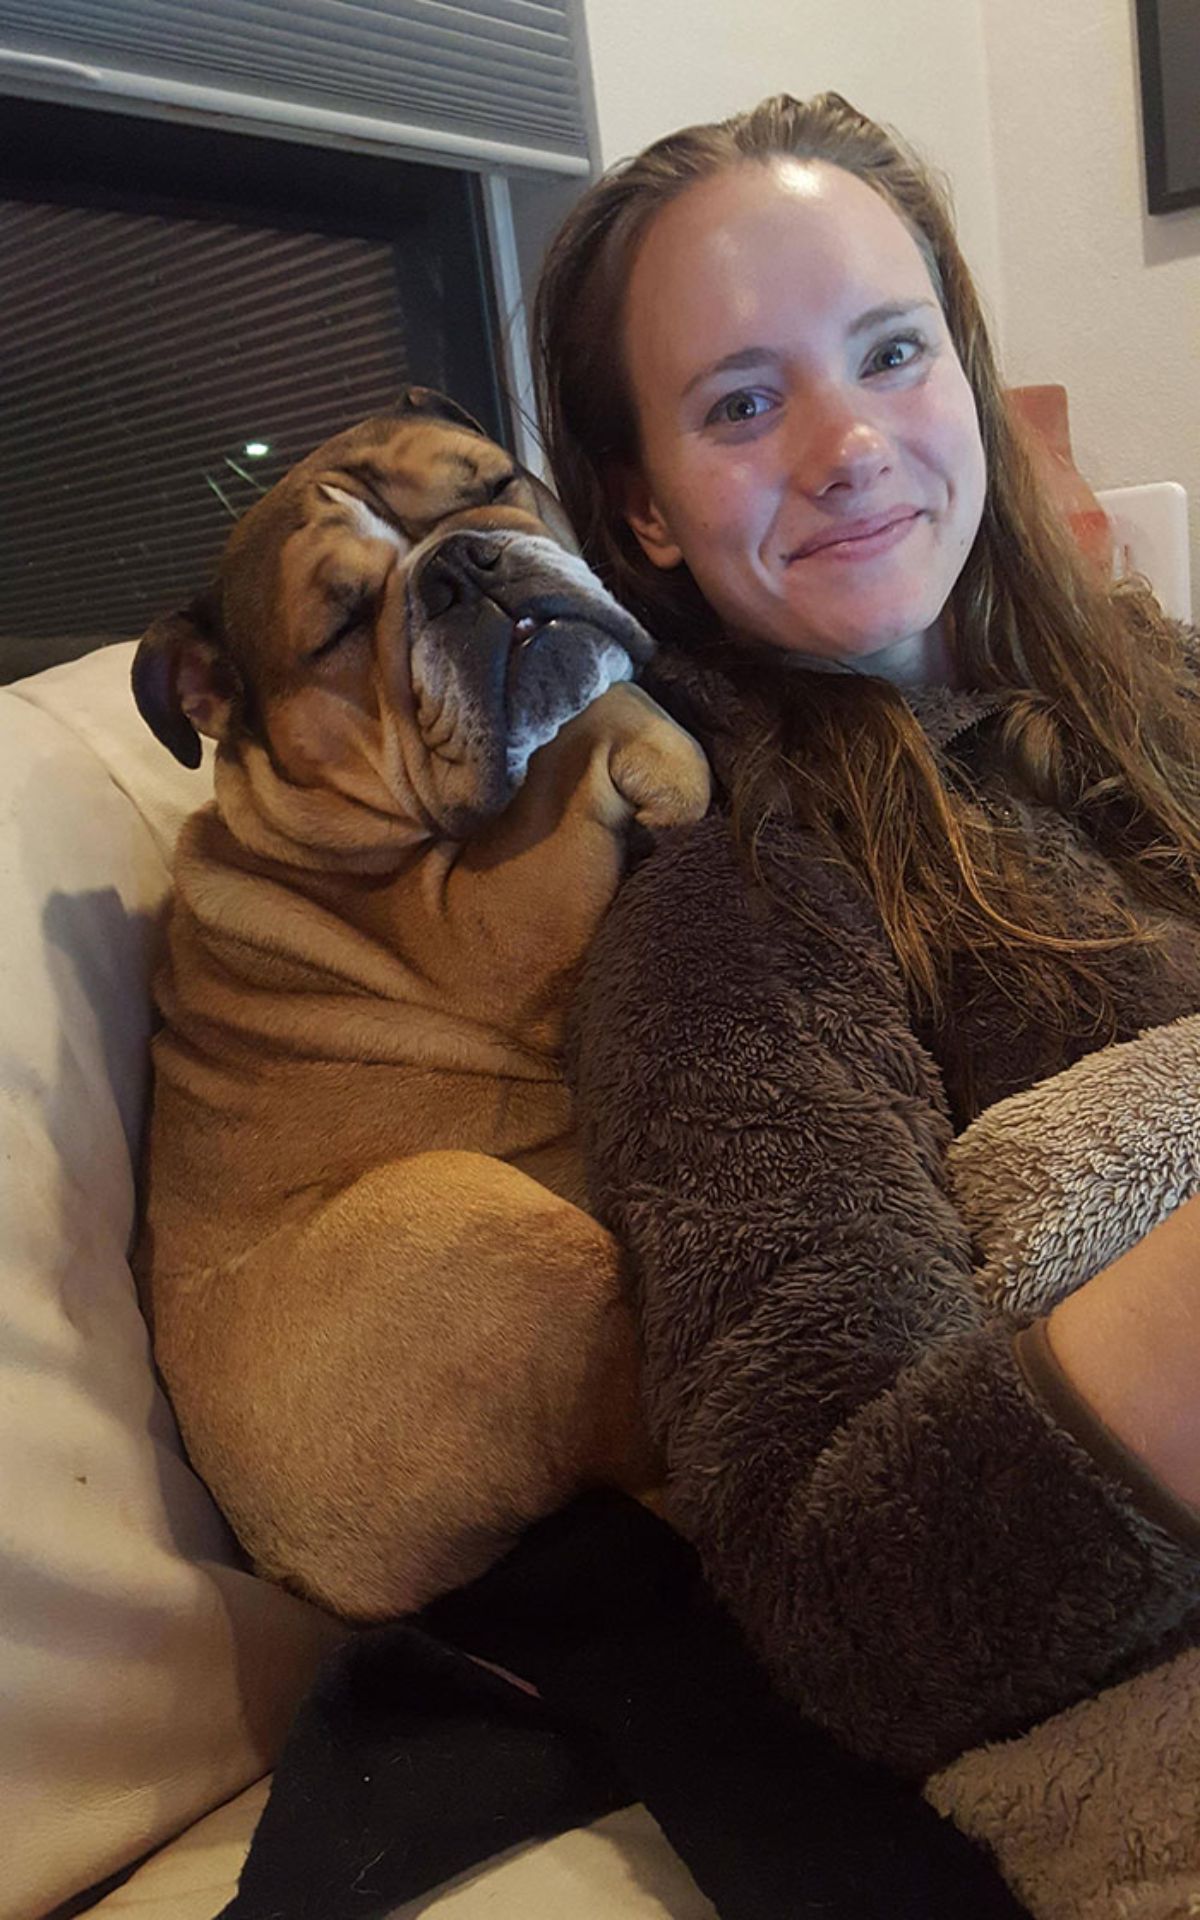 brown and white bulldog sleeping against the back of a woman and squished between her and a white sofa